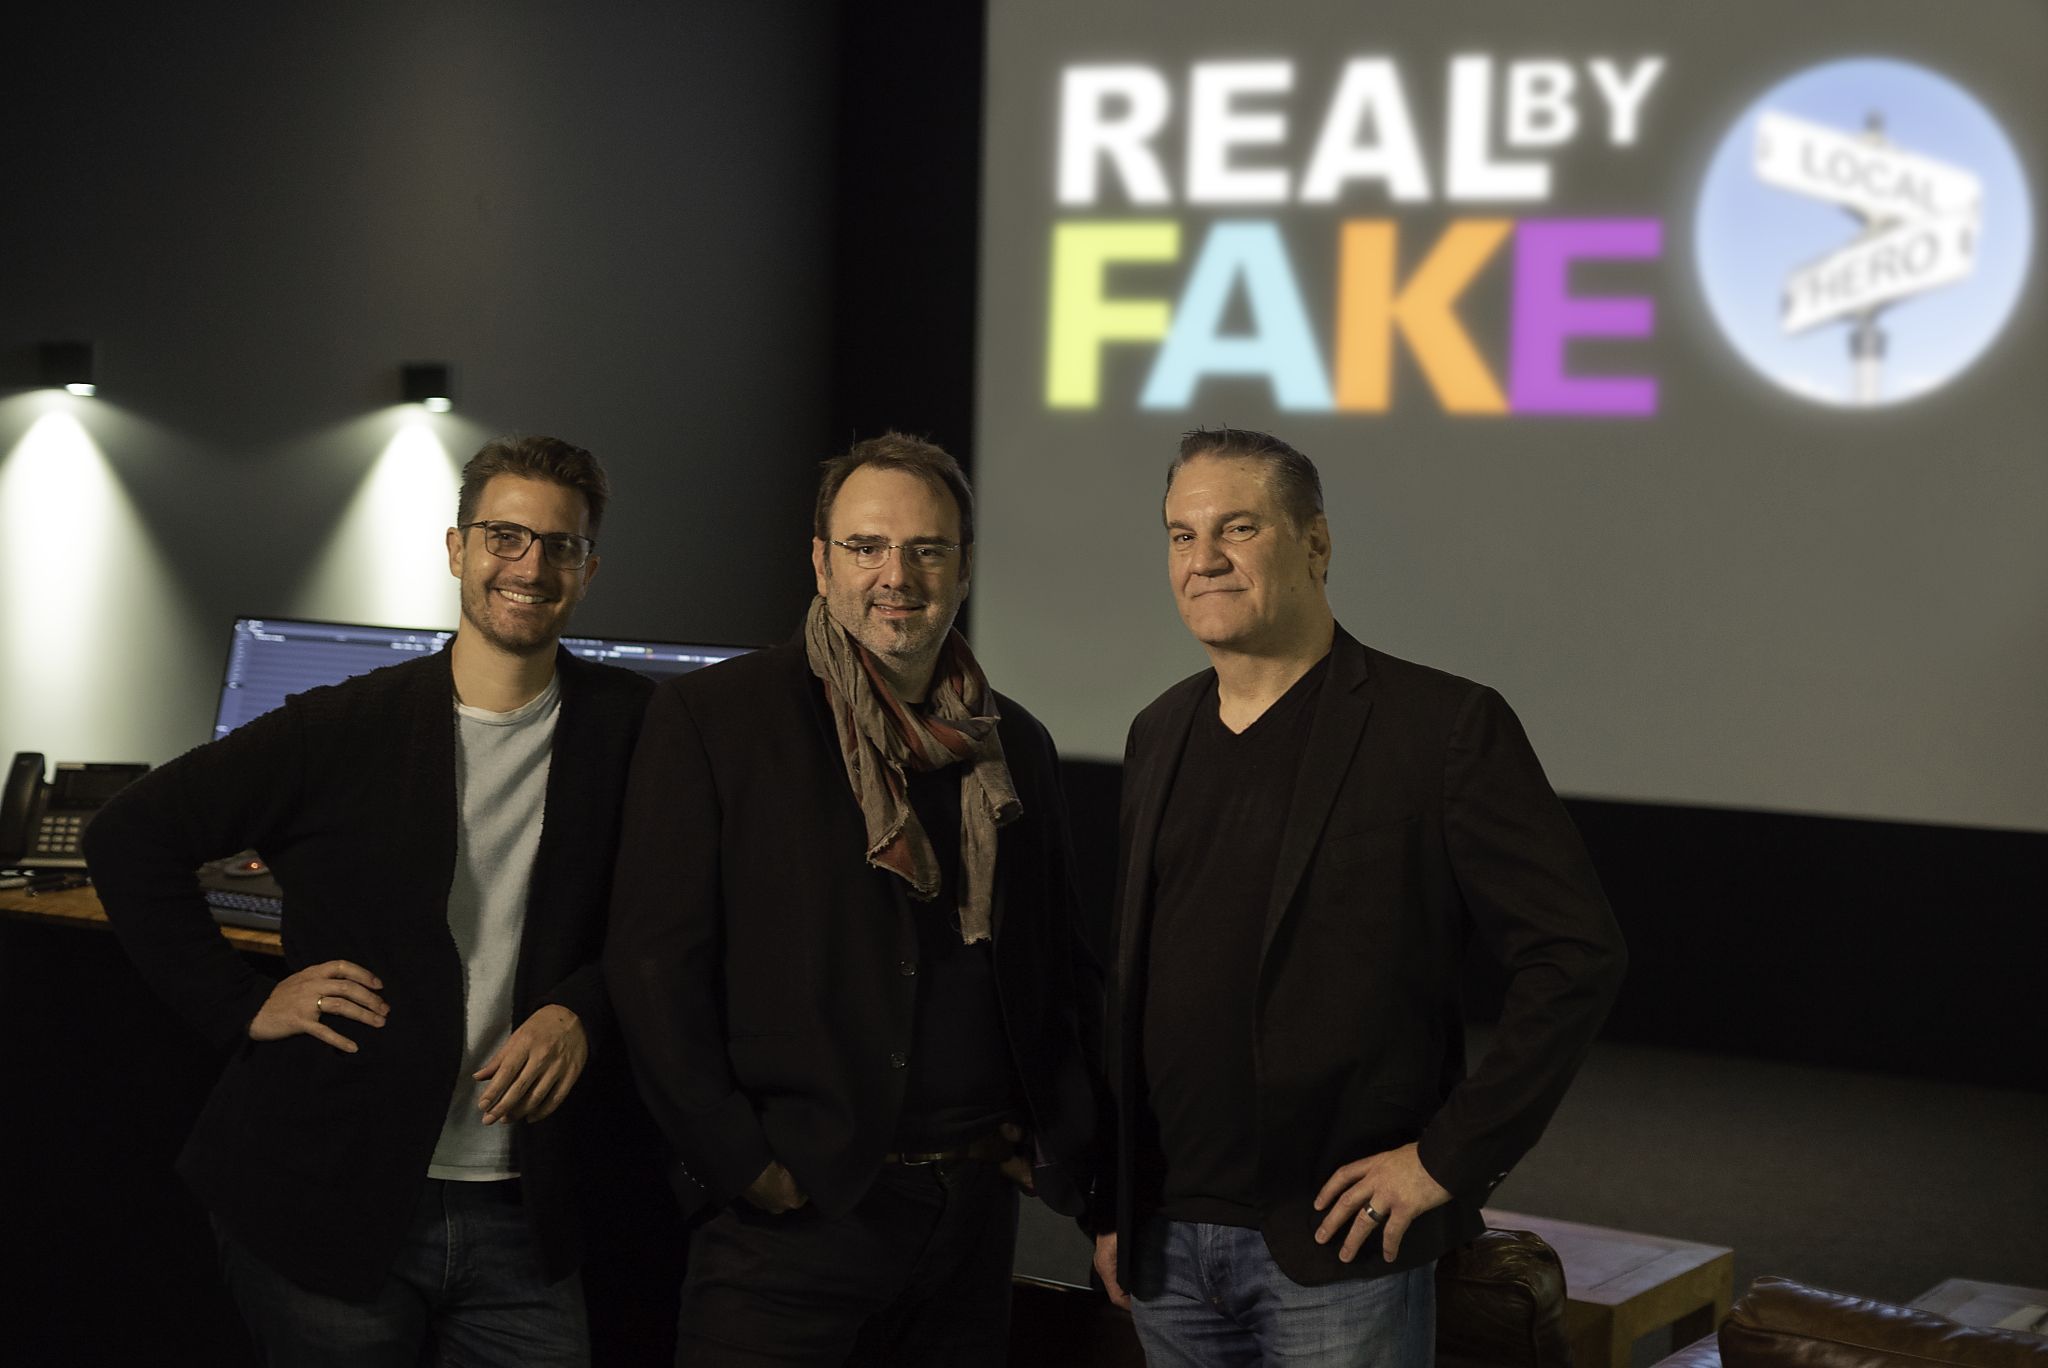  Local Hero founder and Head of Imaging Leandro Marini, Real by Fake President Marc Côté and Local Hero CEO Steve Bannerman